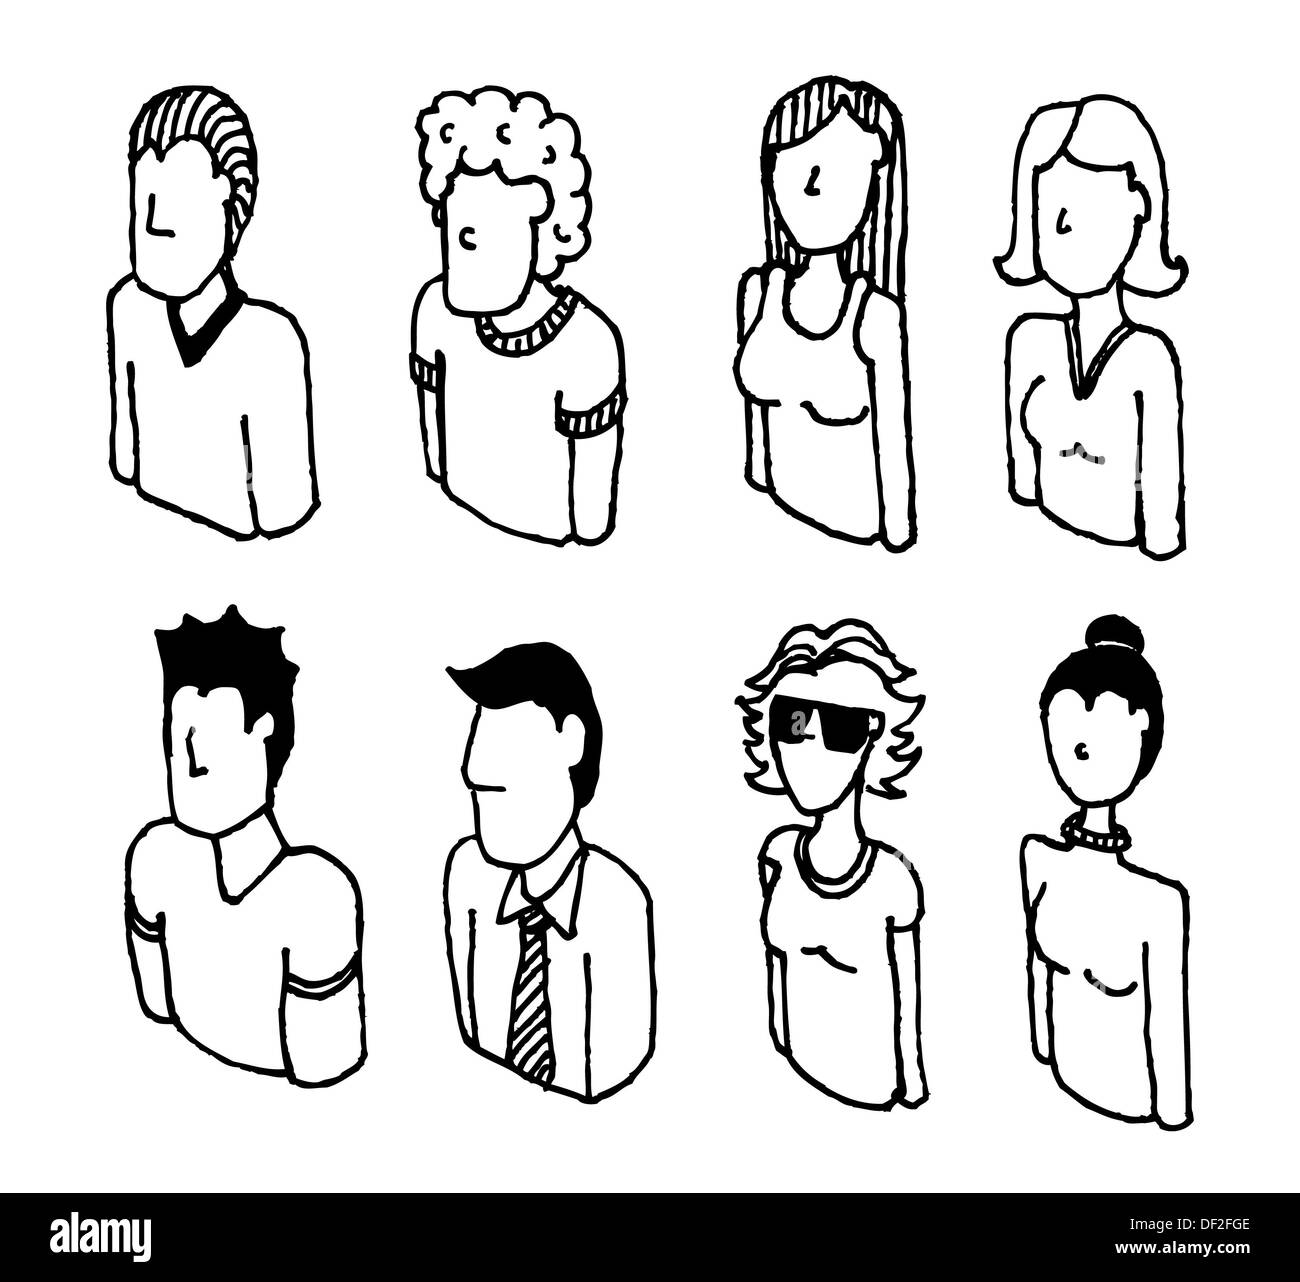 People vector icon set / Lineart characters Stock Photo